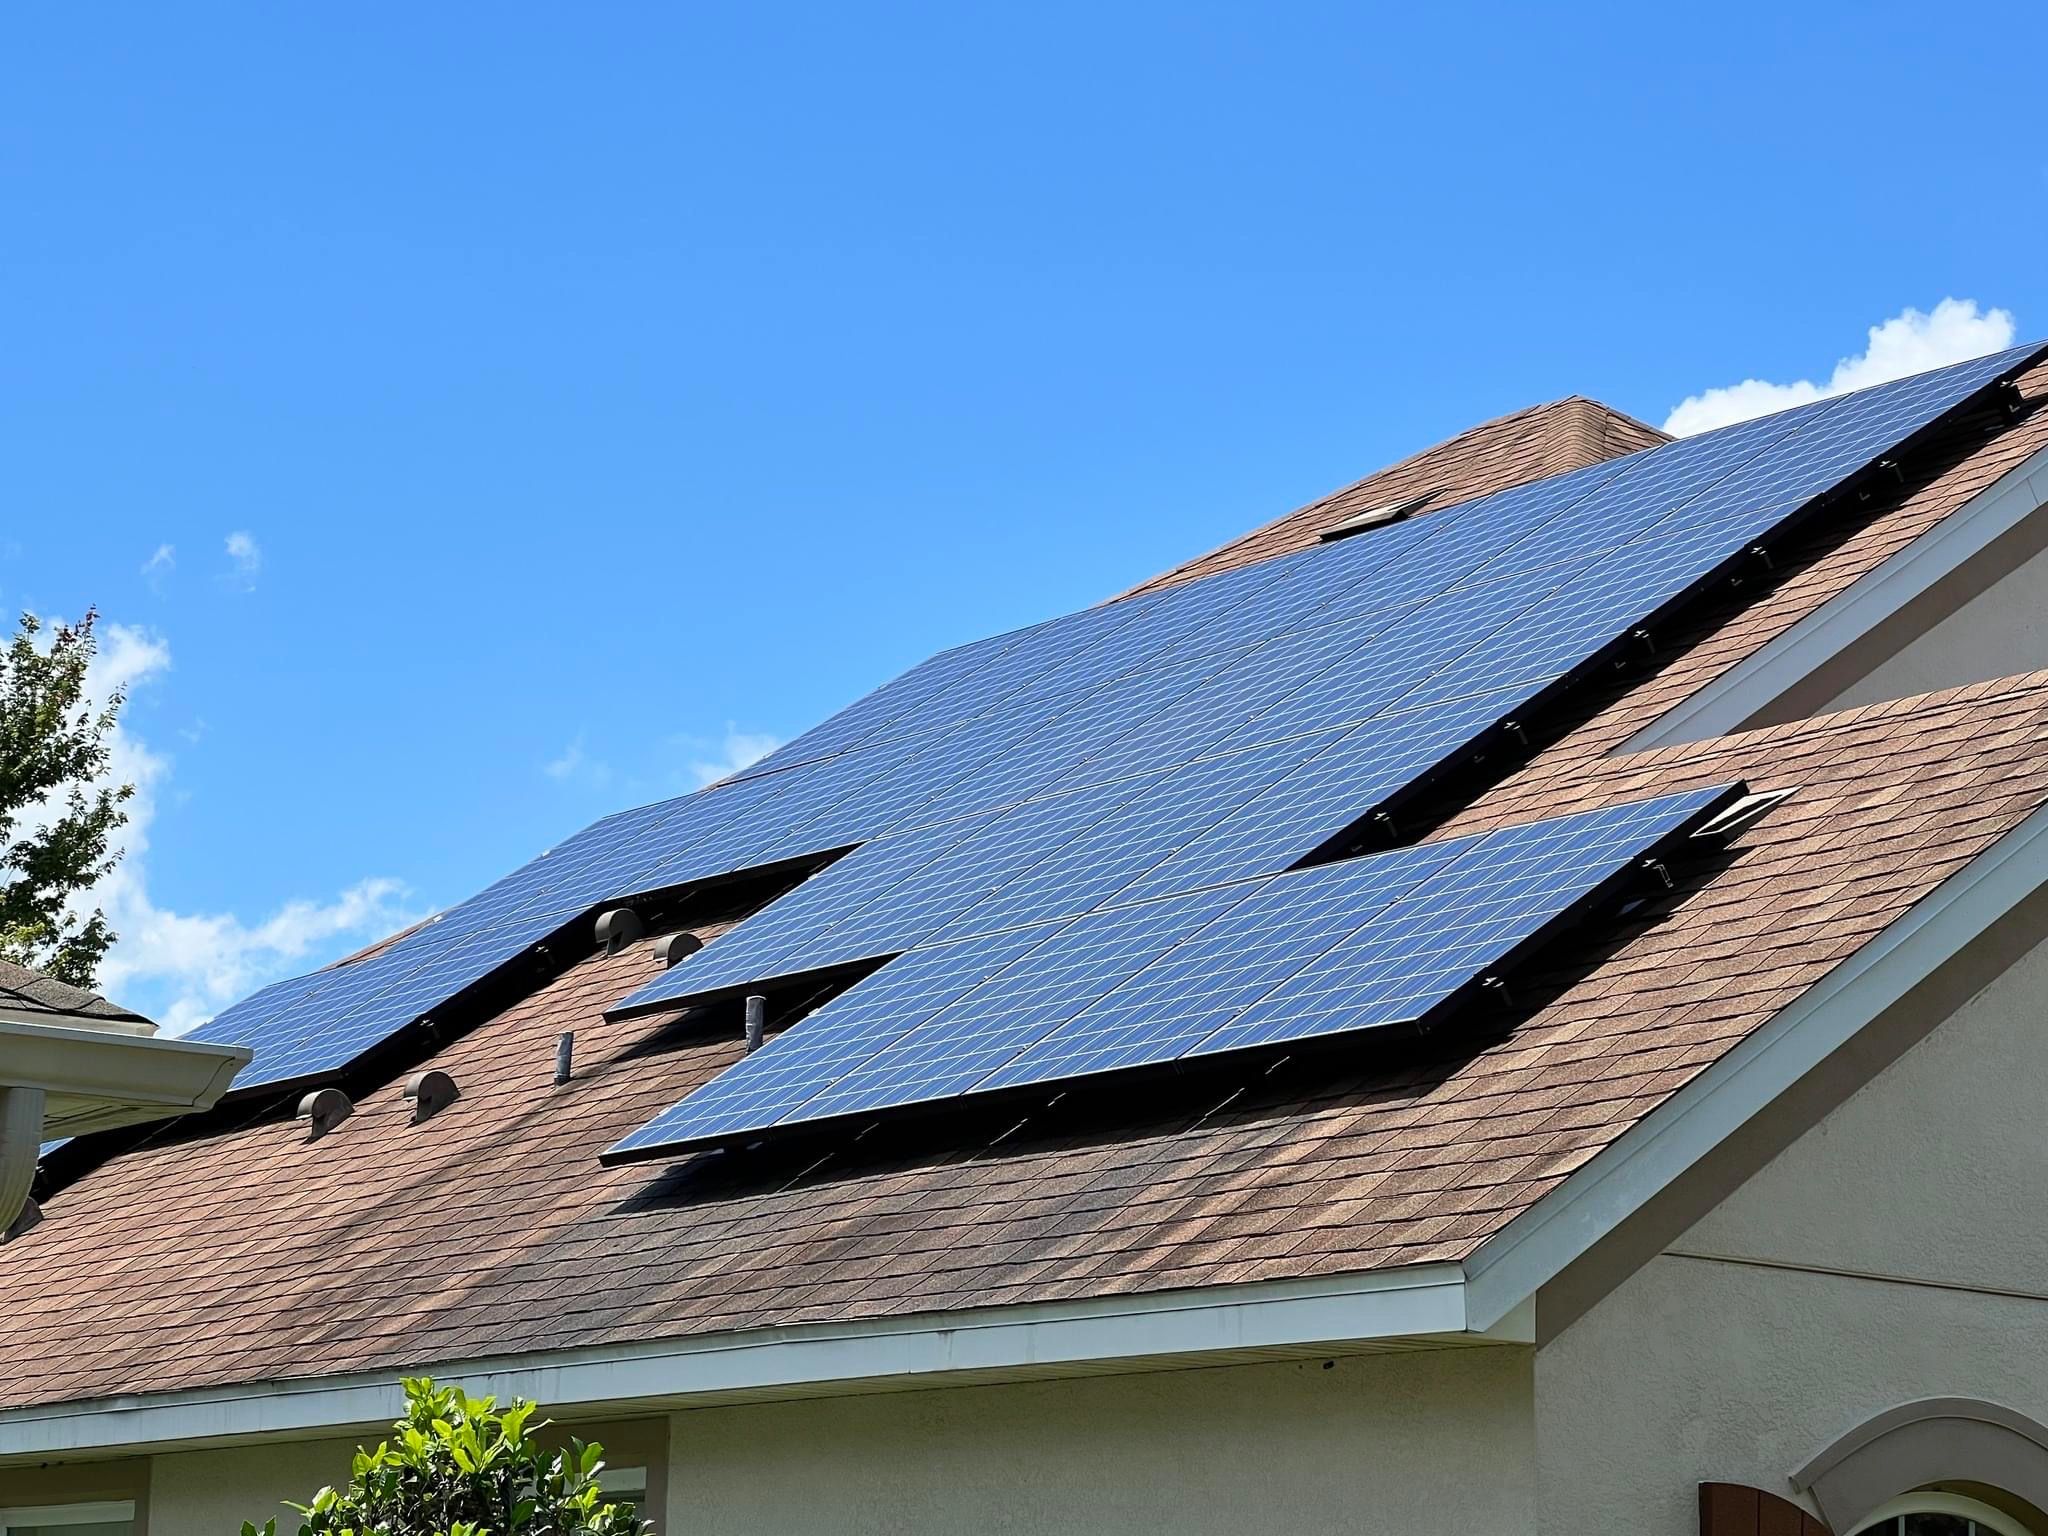 Captivating view of a solar panel's radiance in Anaheim Hills following thorough professional cleaning.